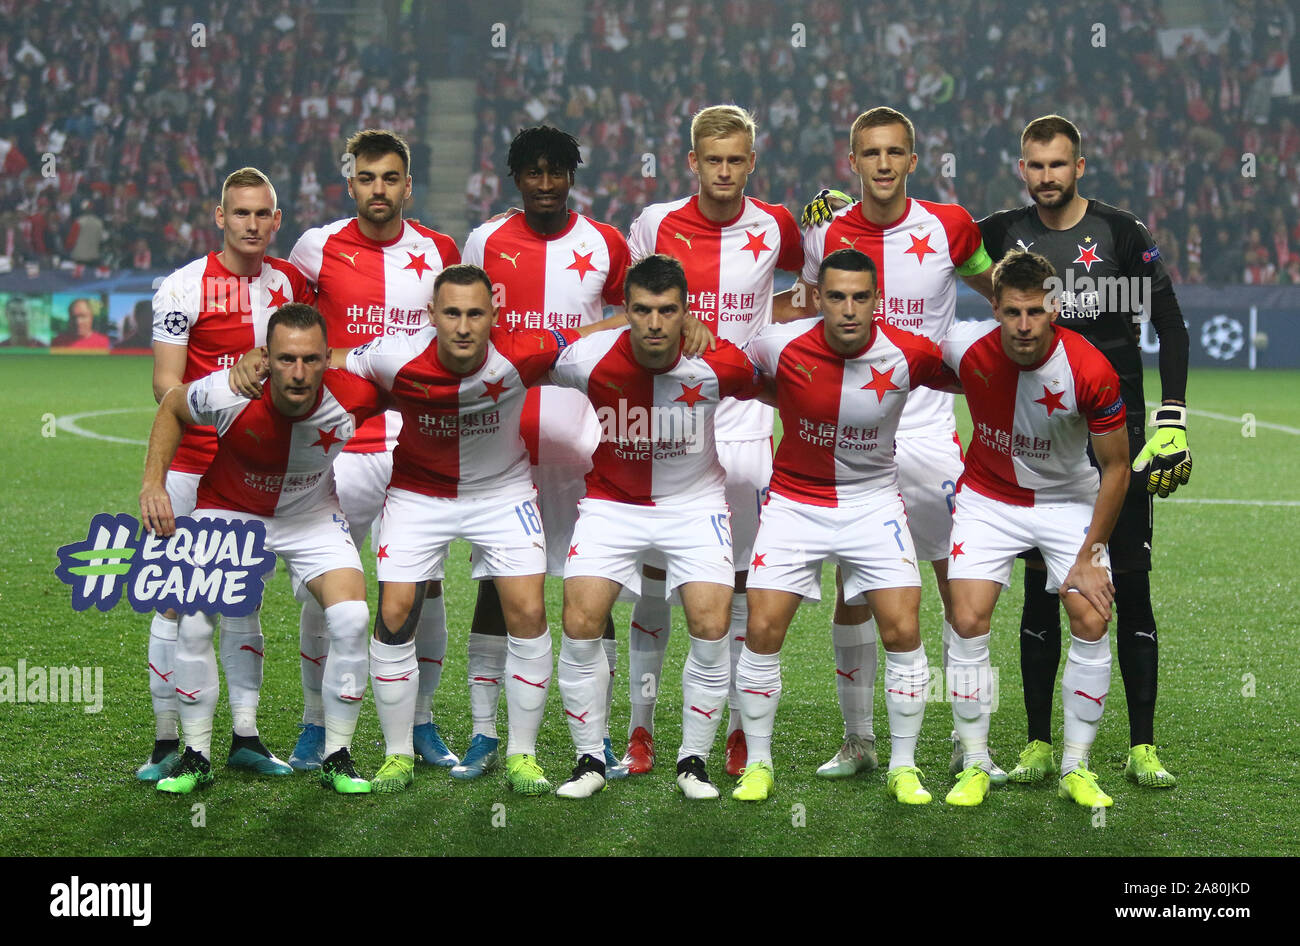 PRAGUE, CZECHIA - OCTOBER 23, 2019: Slavia Praha players pose for a group photo before UEFA Champions League game against Barcelona at Eden Arena in Prague, Czech Republic Stock Photo